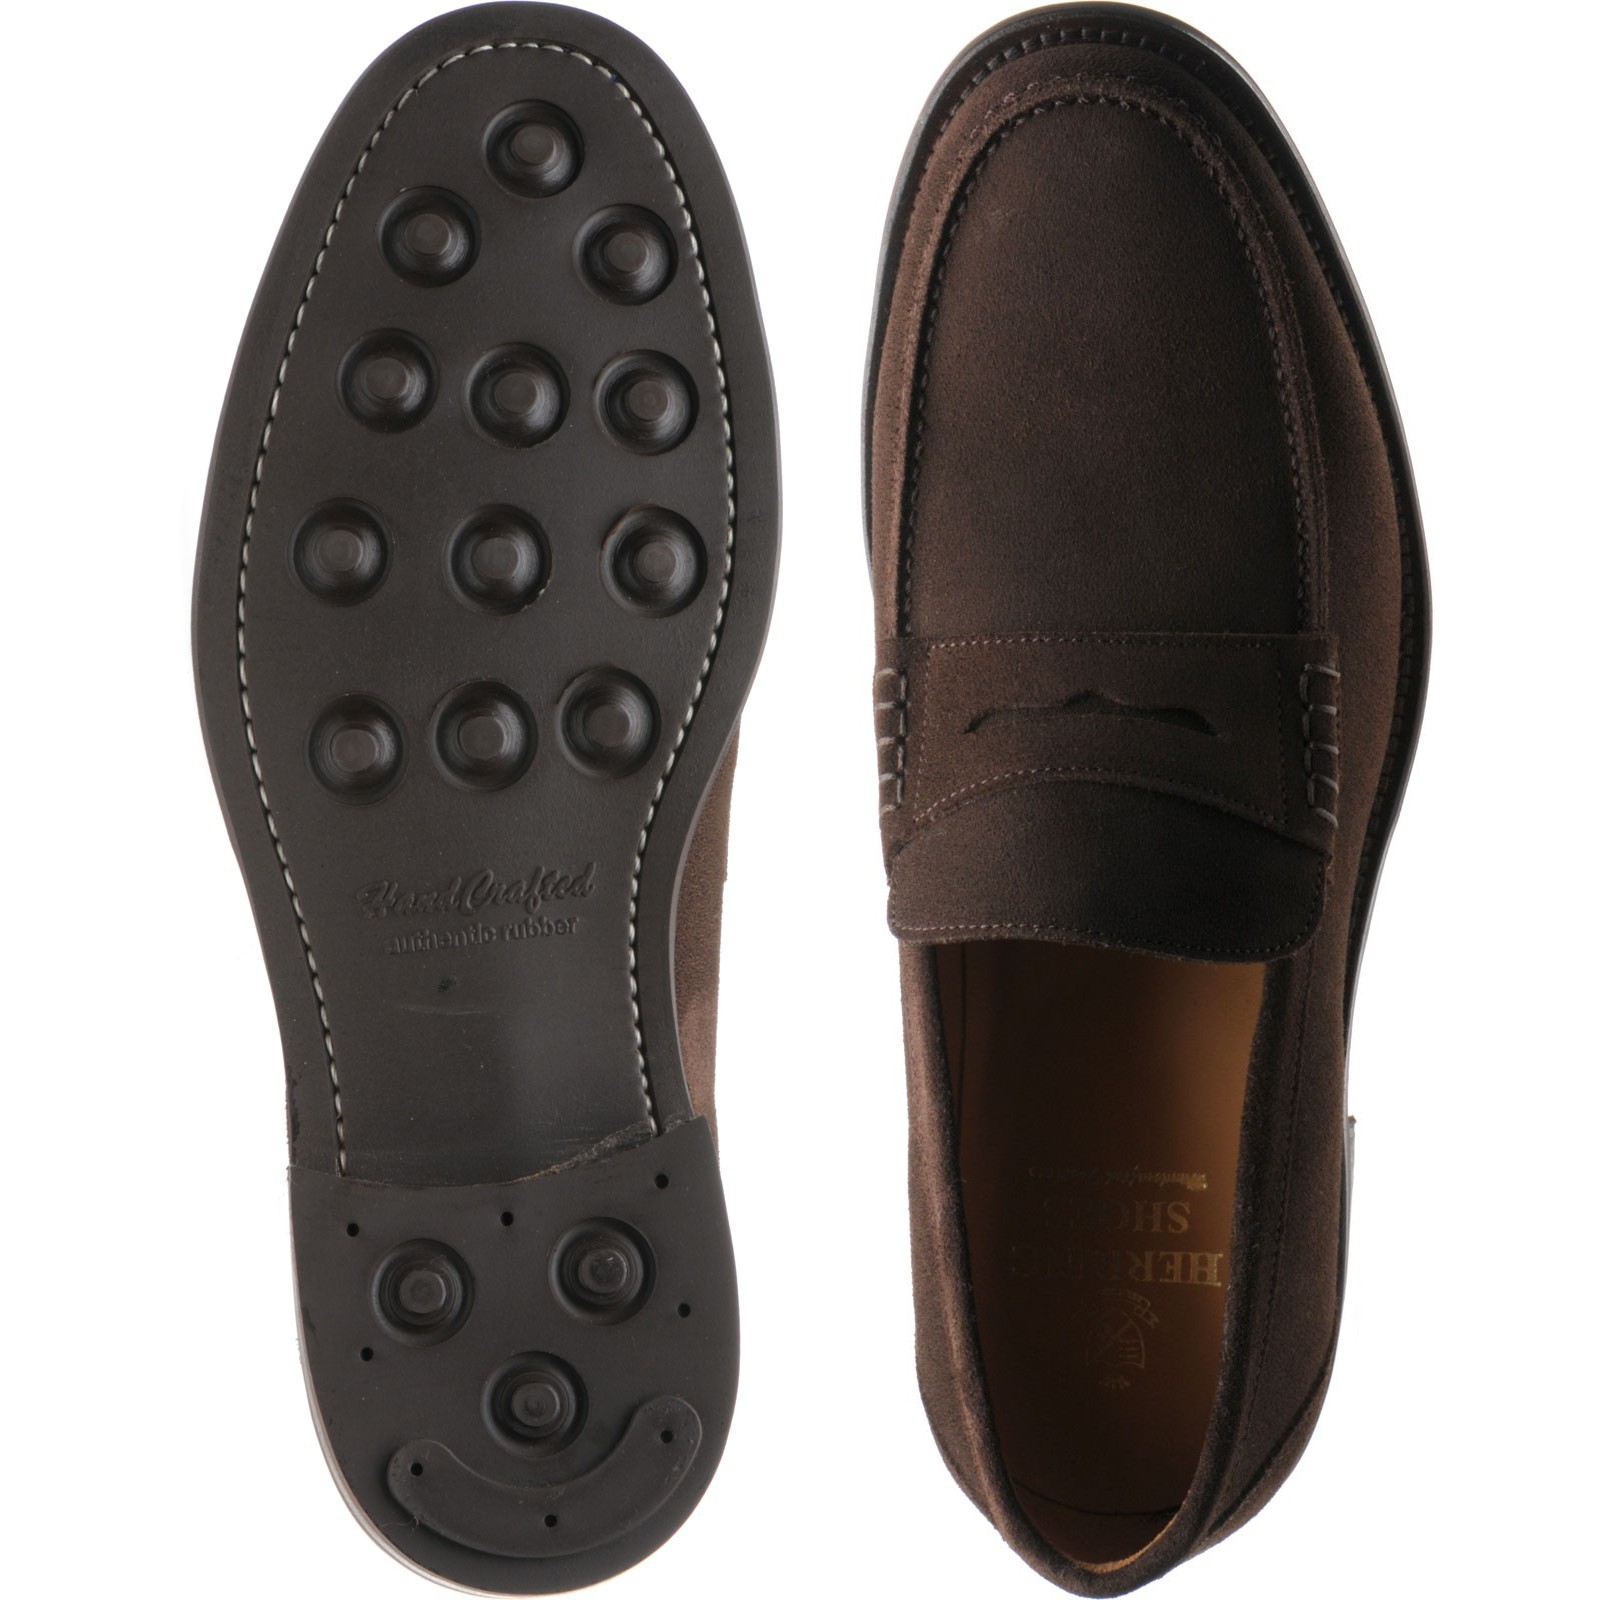 Herring shoes | Herring Classic | Exeter (Rubber) rubber-soled loafers ...